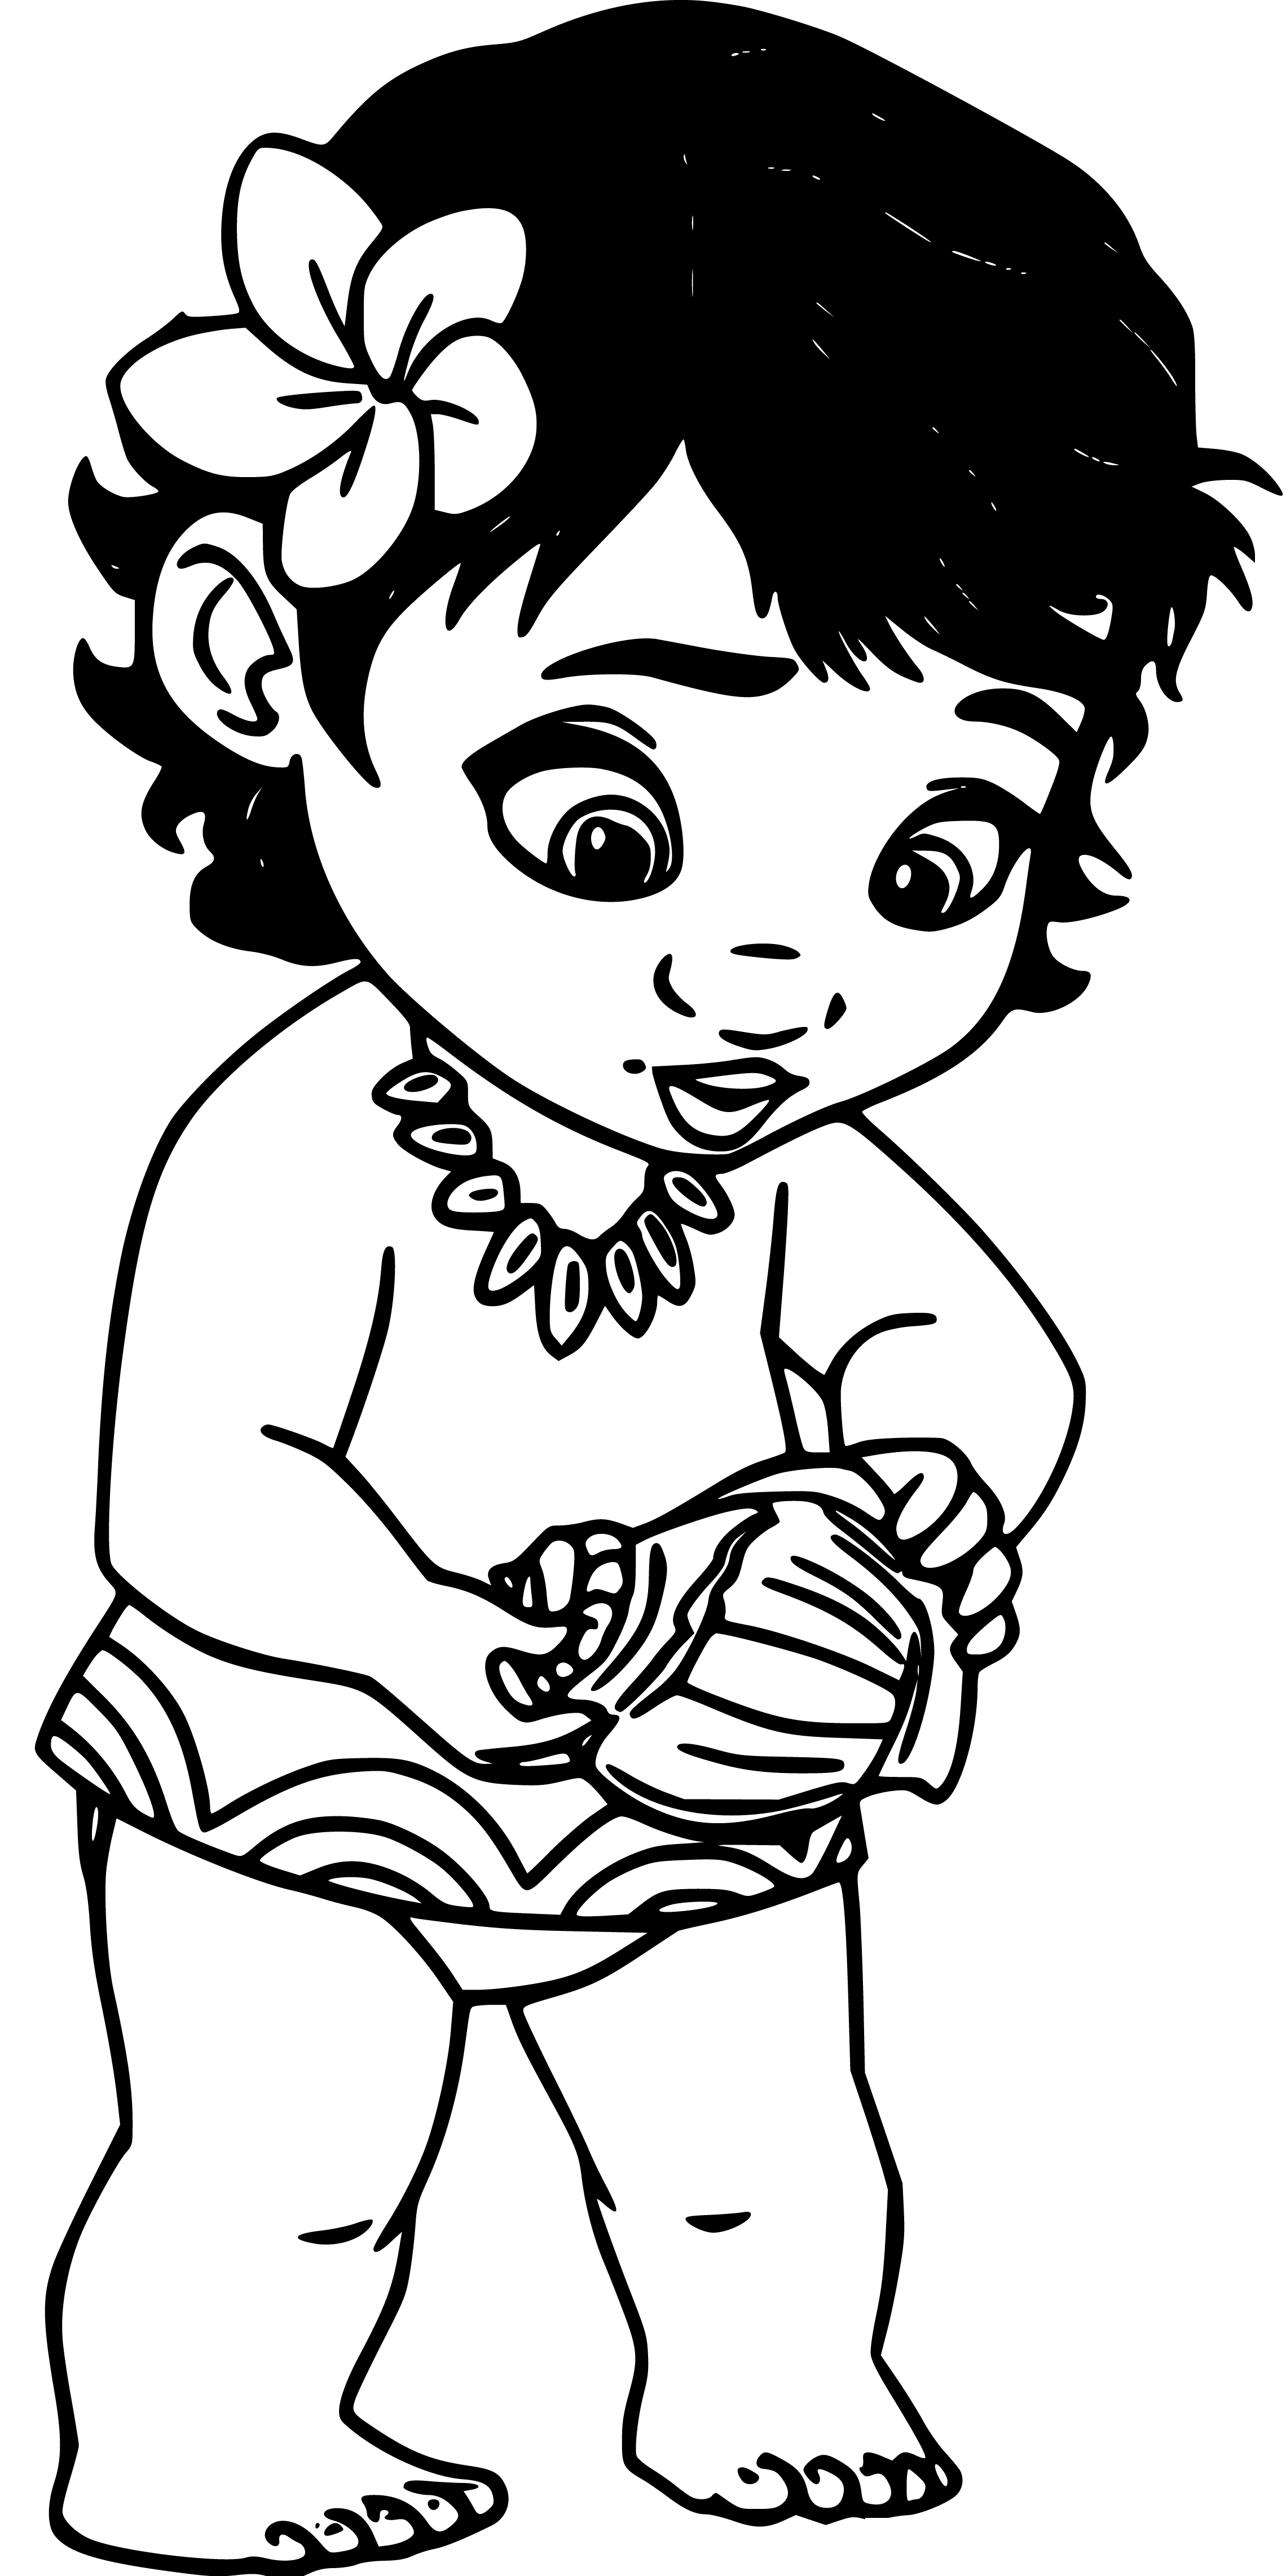 Printable Moana as Baby Coloring Page for kids.